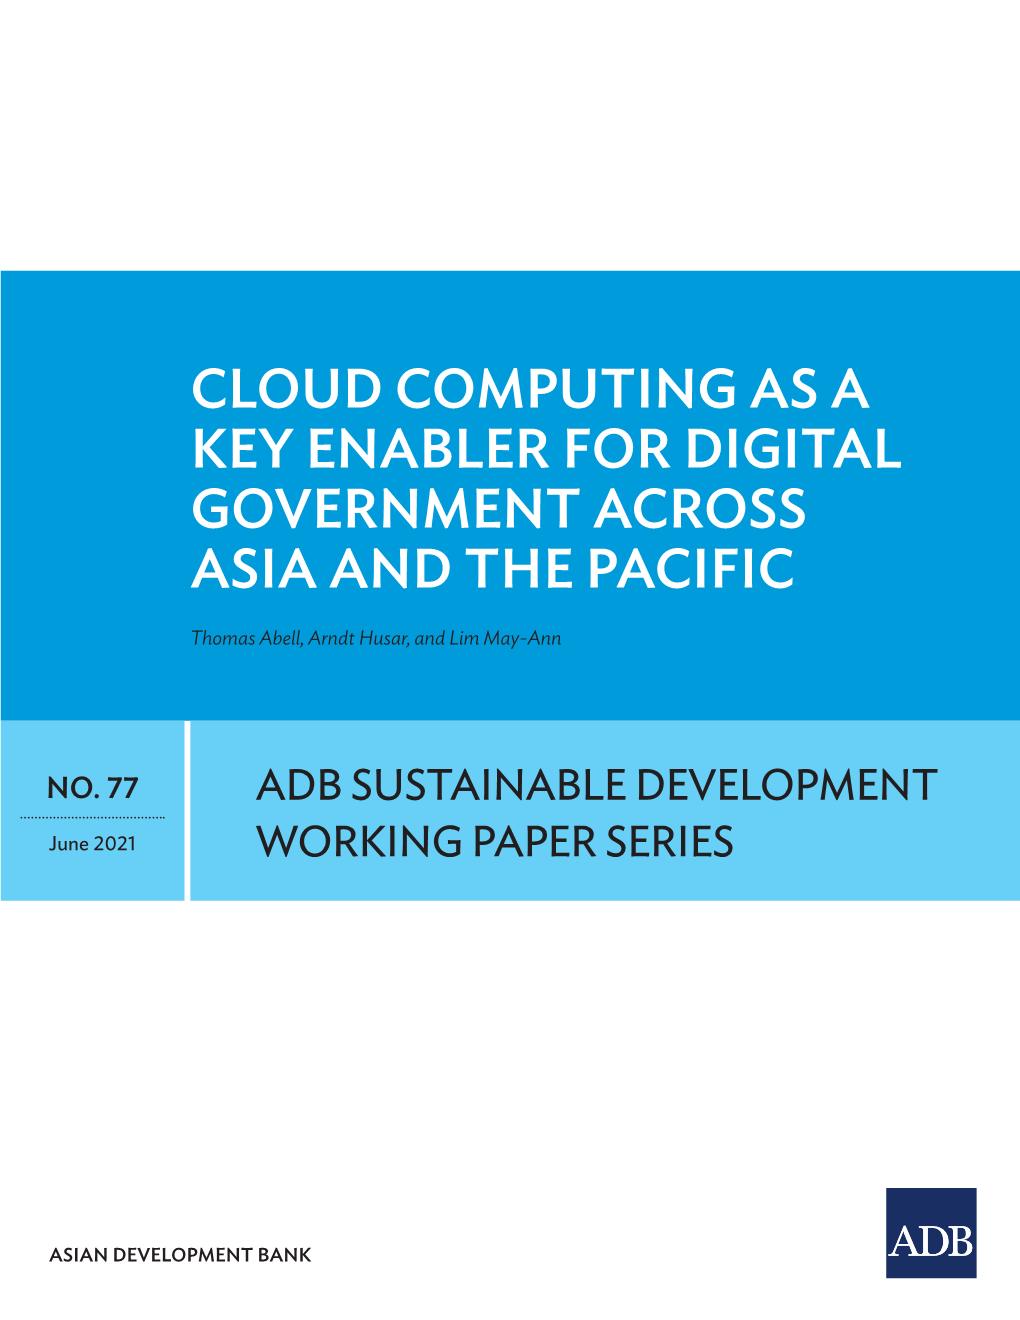 Cloud Computing As a Key Enabler for Digital Government Across Asia and the Pacific